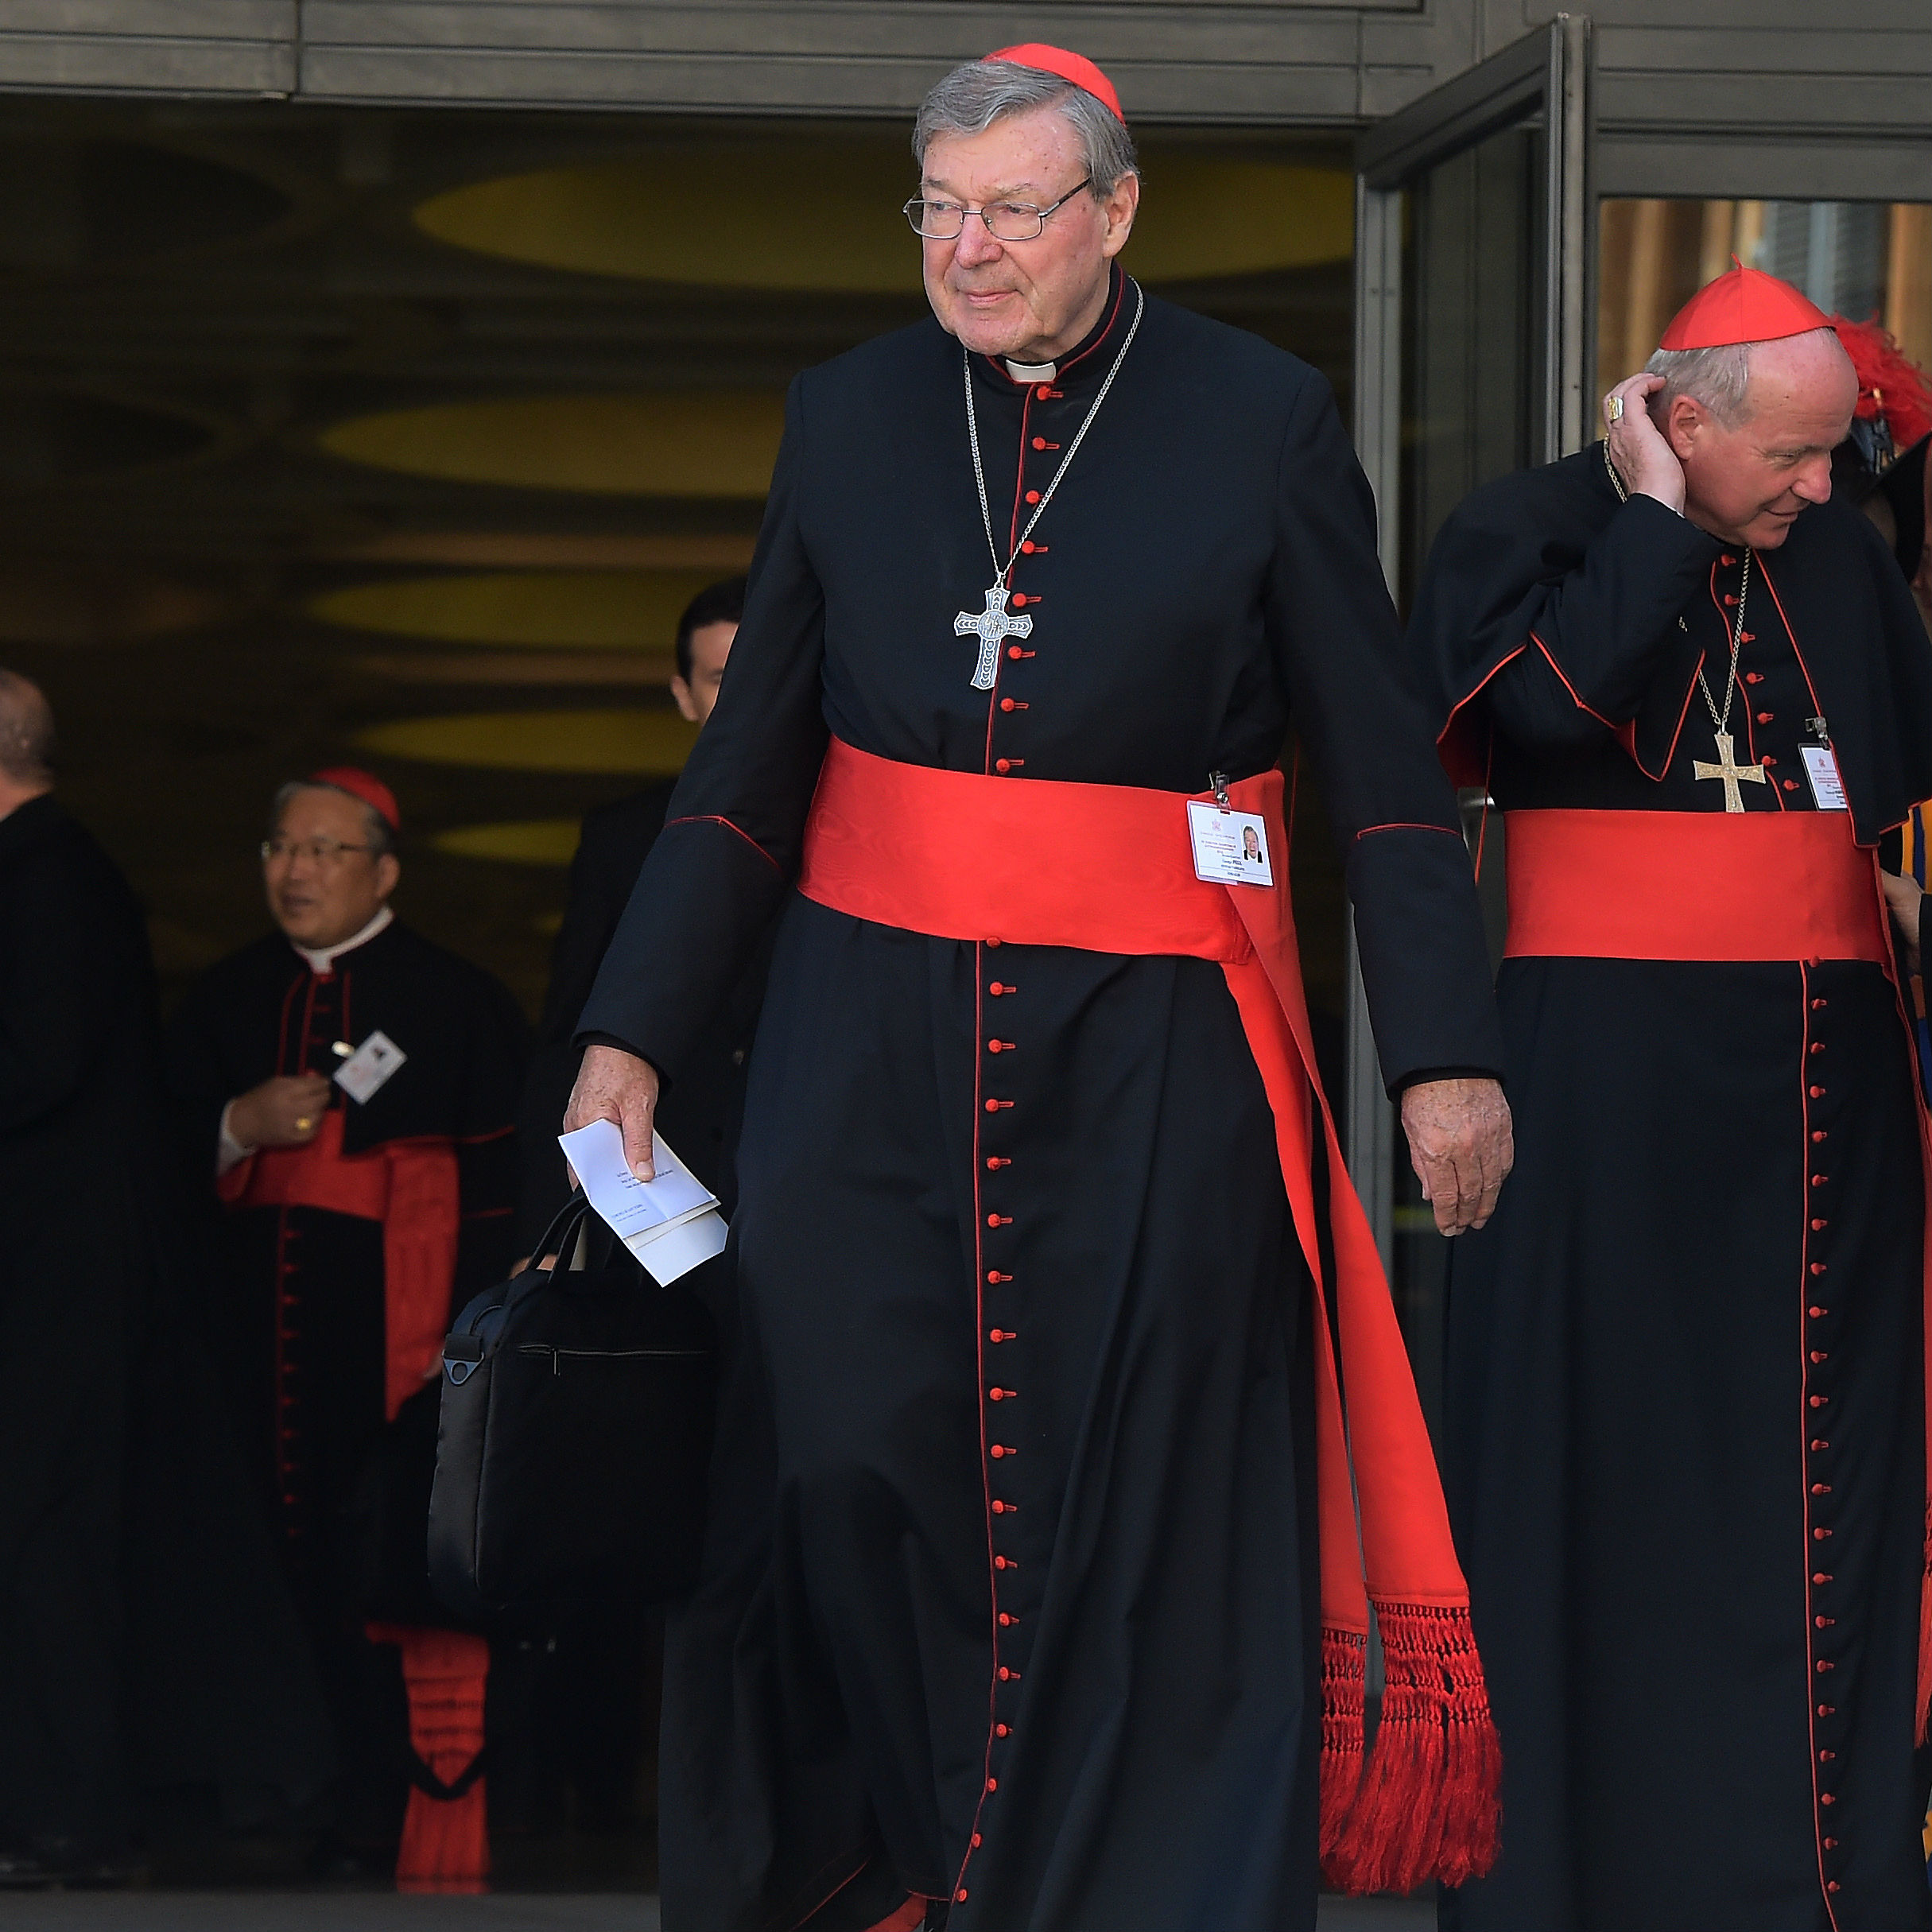 Where does the royal commission leave Cardinal Pell in the Vatican?